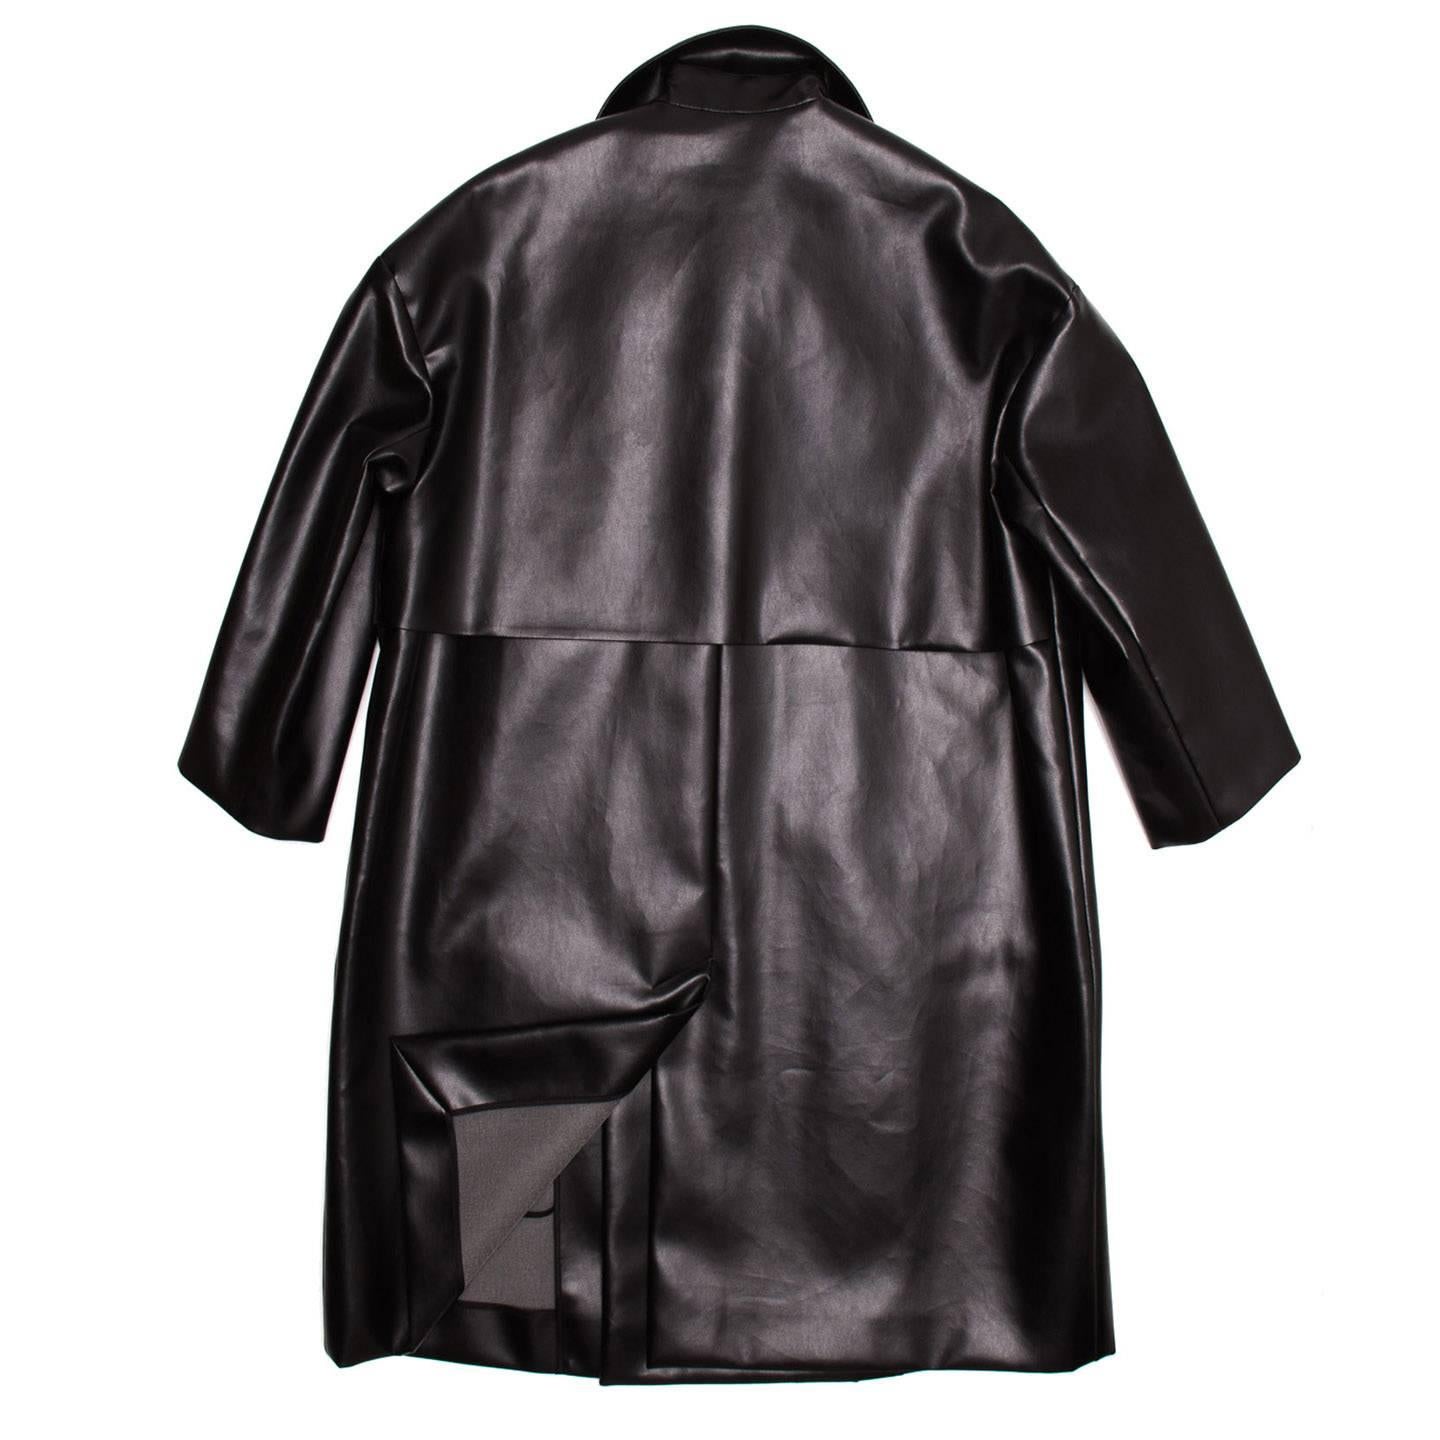 Black oversized polyurethane coat with 3/4 sleeves. The coat is knee length, boxy fit and the front opening is buttonless. The lapel is quite wide, the trench coat typical yoke details embellish front and back and the two slit pockets sit at hips.